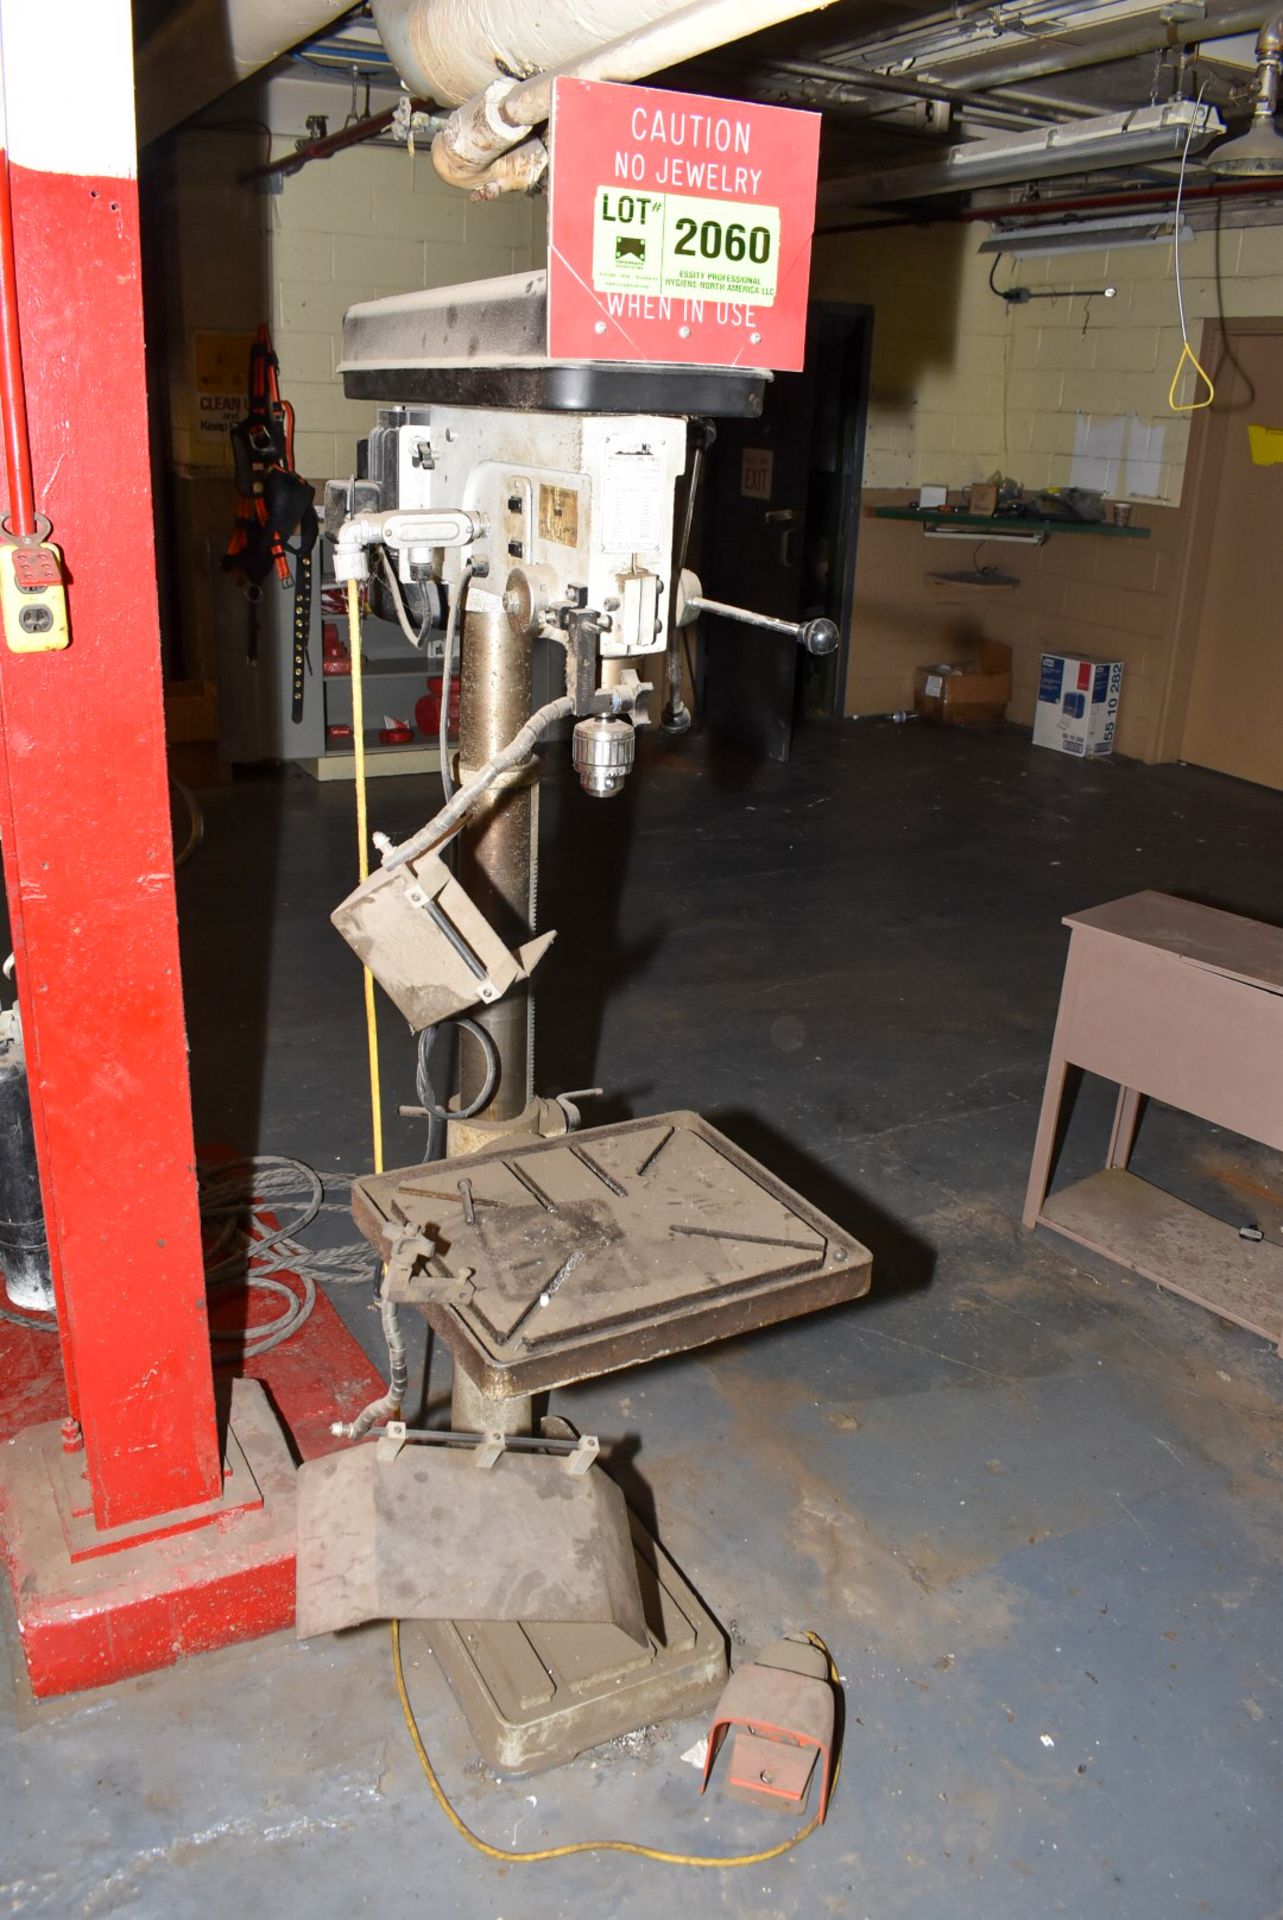 MANHATTAN MSC MODEL 95-235 HEAVY DUTY FLOOR TYPE DRILL PRESS WITH SPEEDS TO 4200 RPM, 1 HP DRIVE - Image 2 of 3